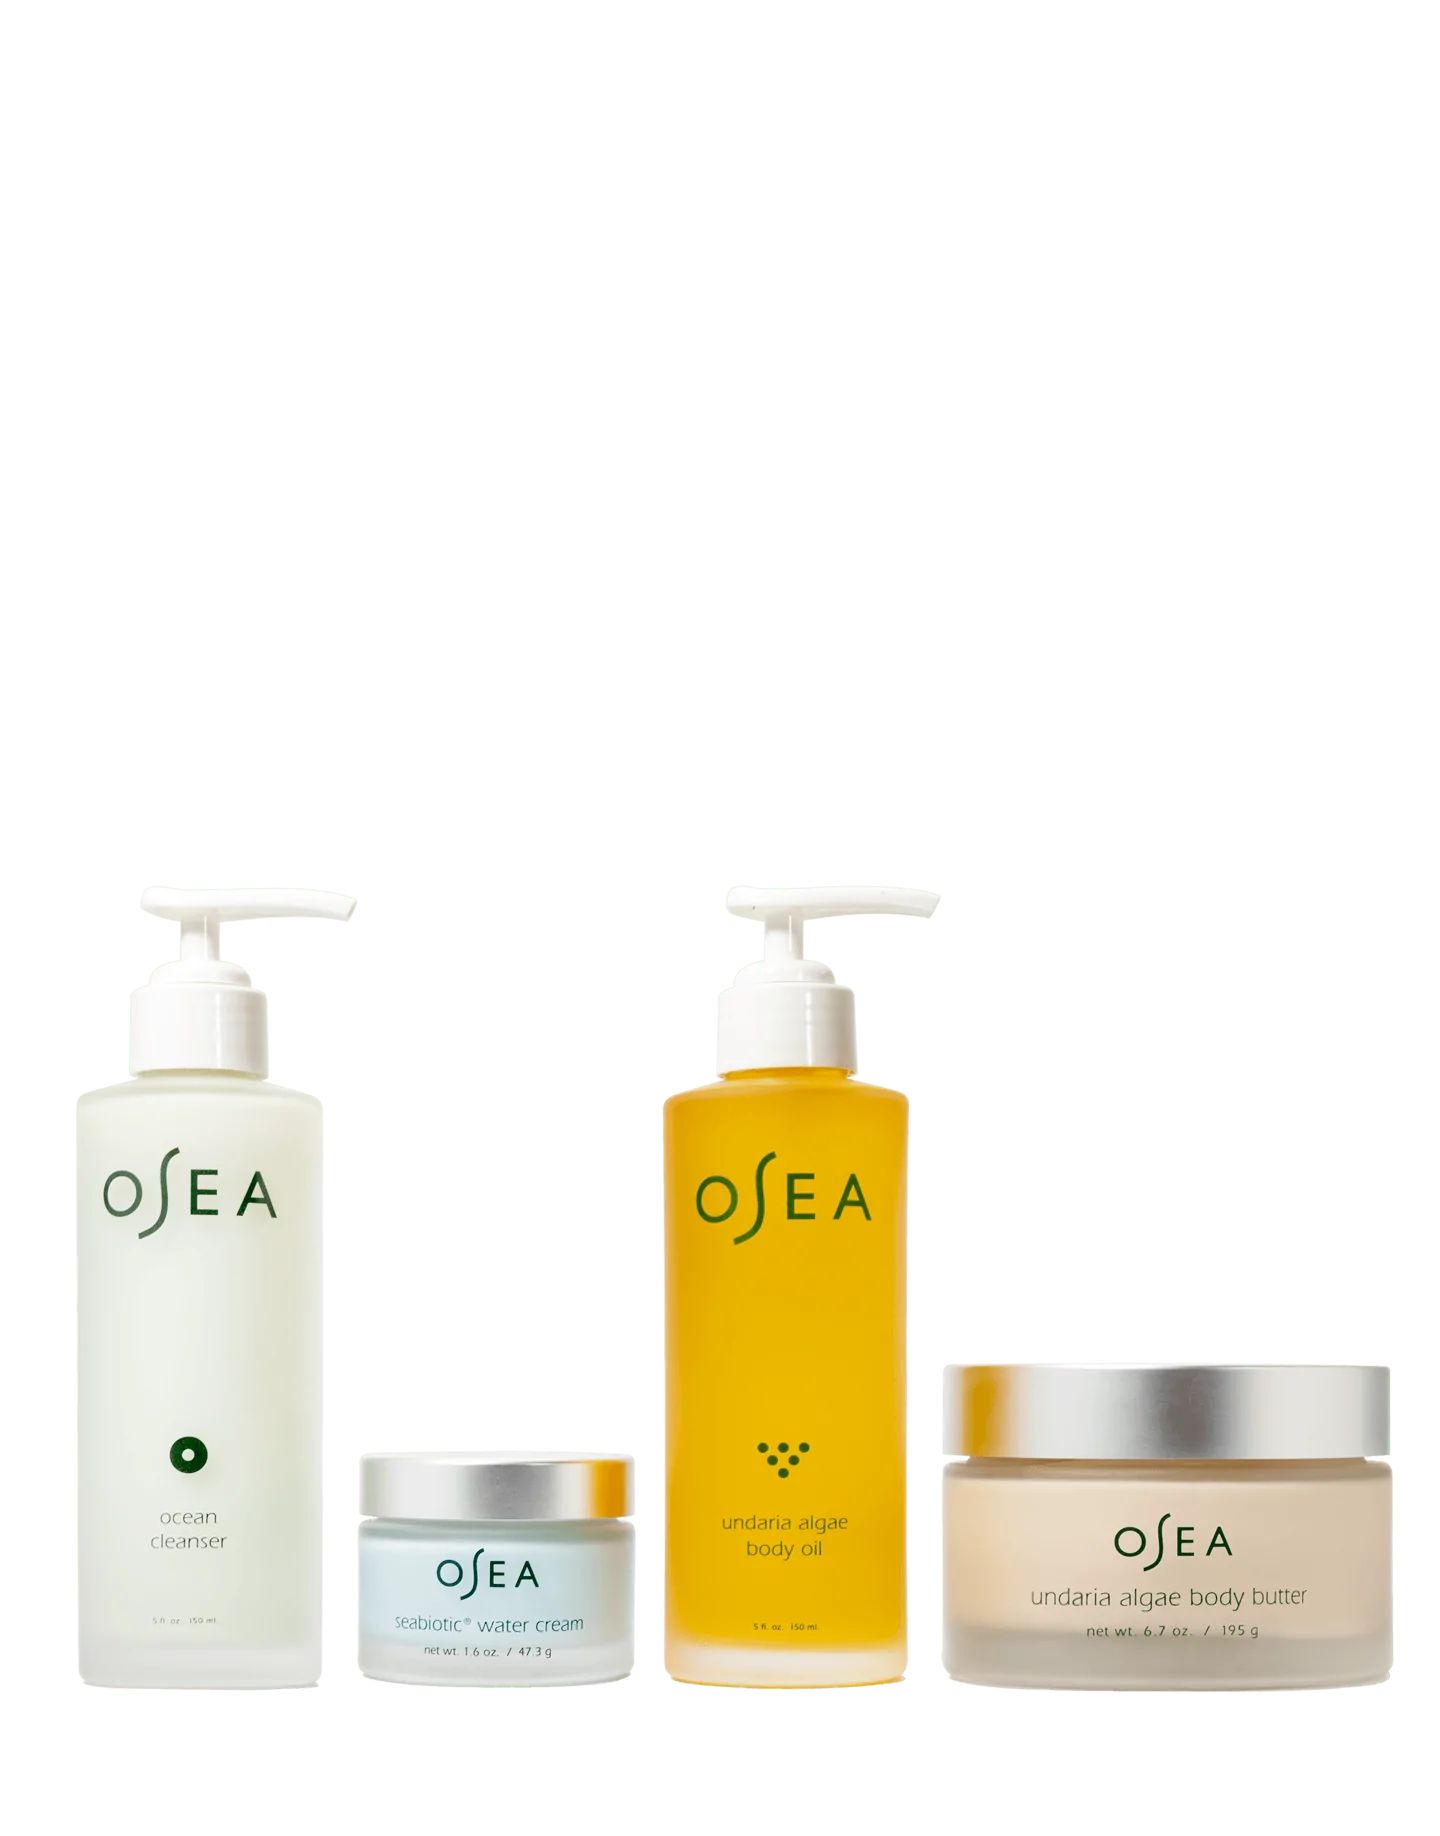 Best Sellers Collection | Spa Experience at Home | Clean, Vegan Skincare | OSEA Malibu